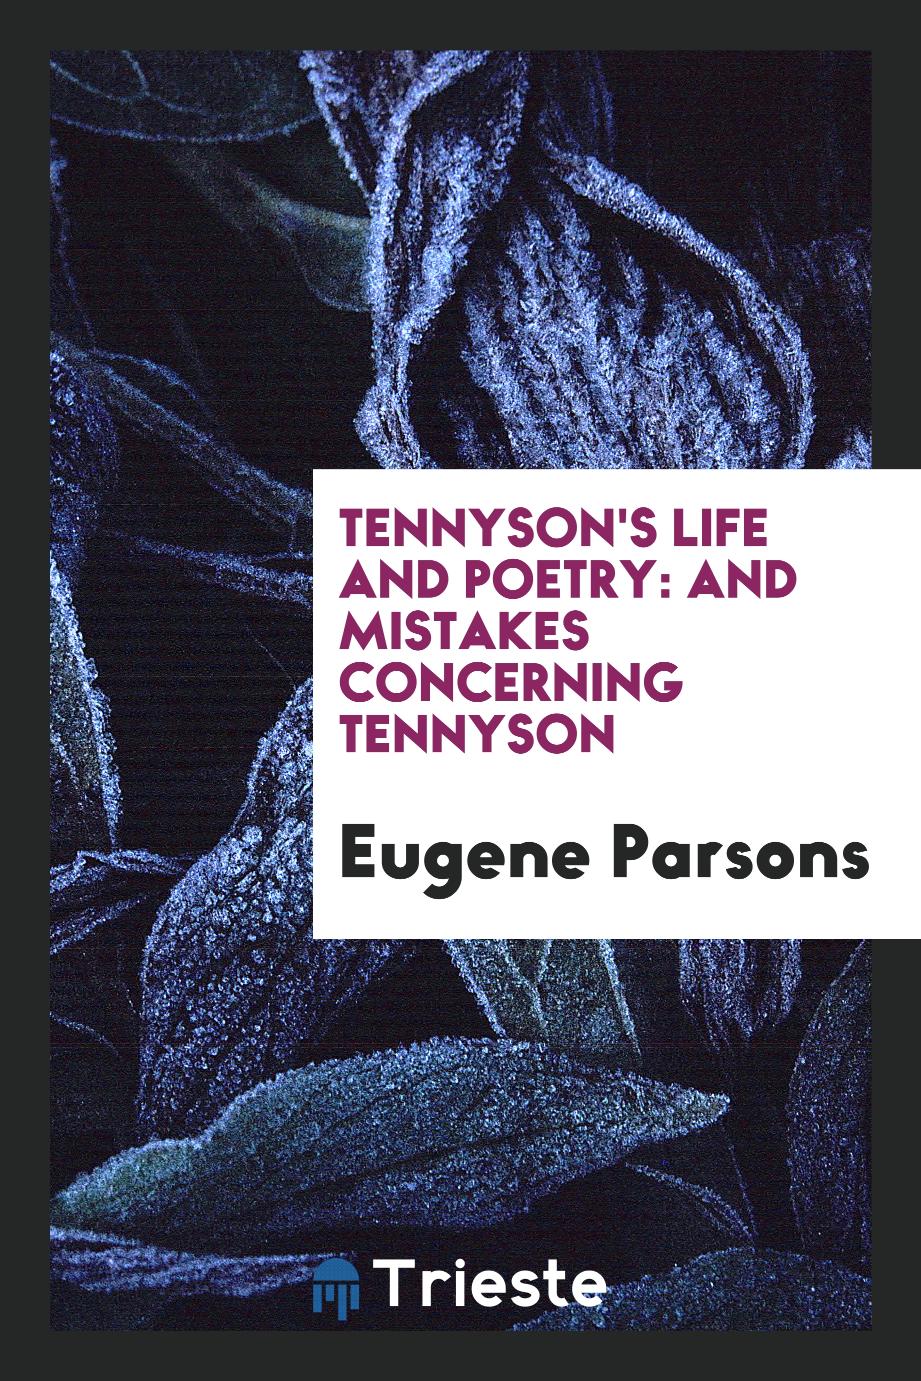 Tennyson's life and poetry: and mistakes concerning Tennyson